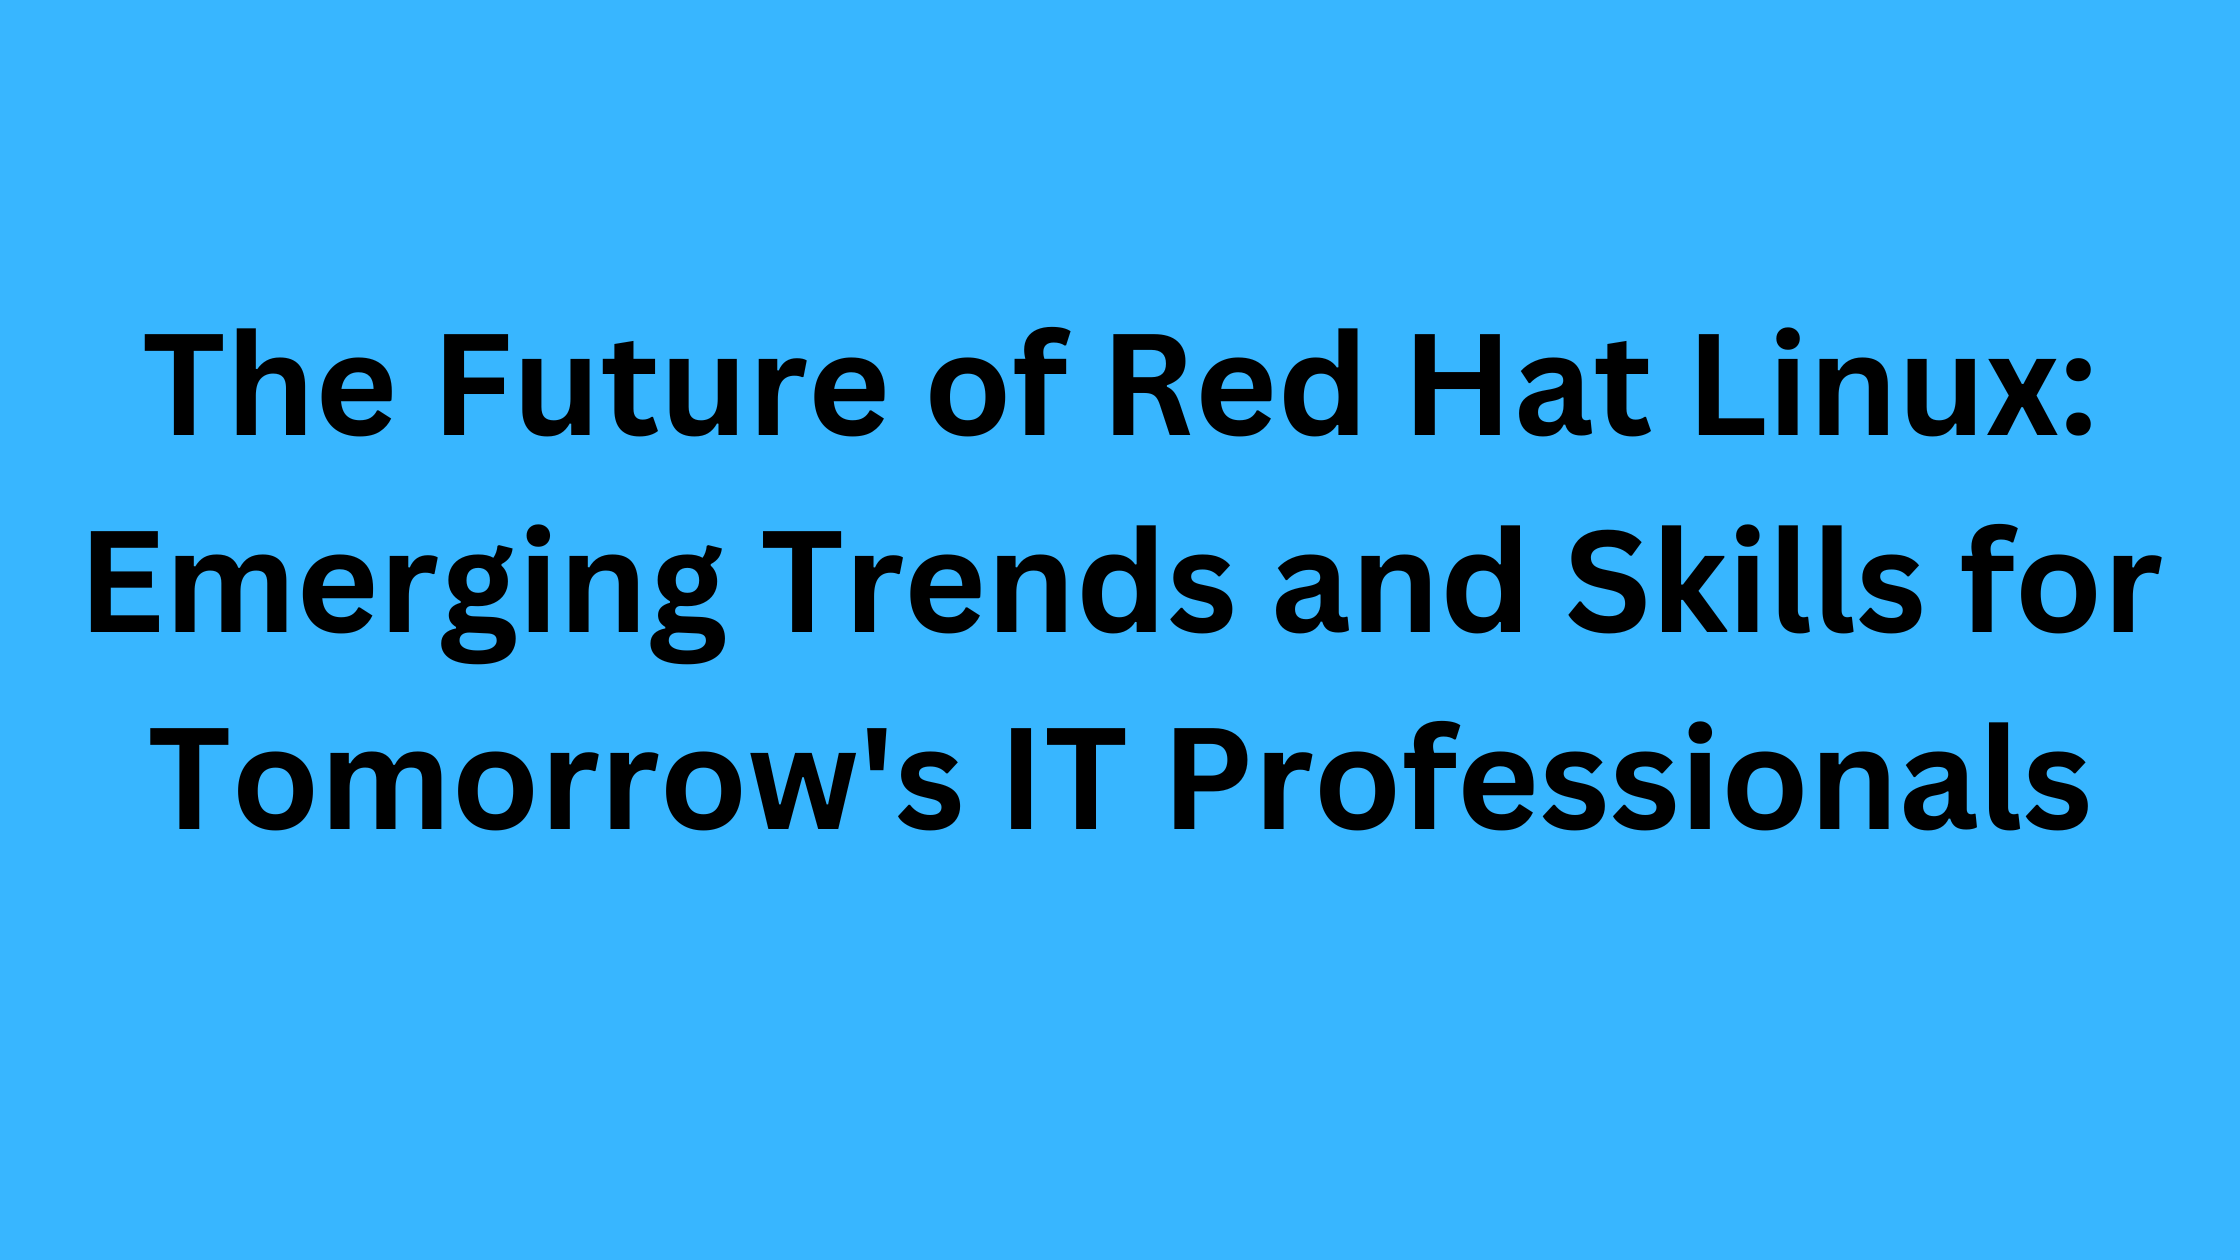 The Future of Red Hat Linux: Emerging Trends and Skills for Tomorrow's IT Professionals